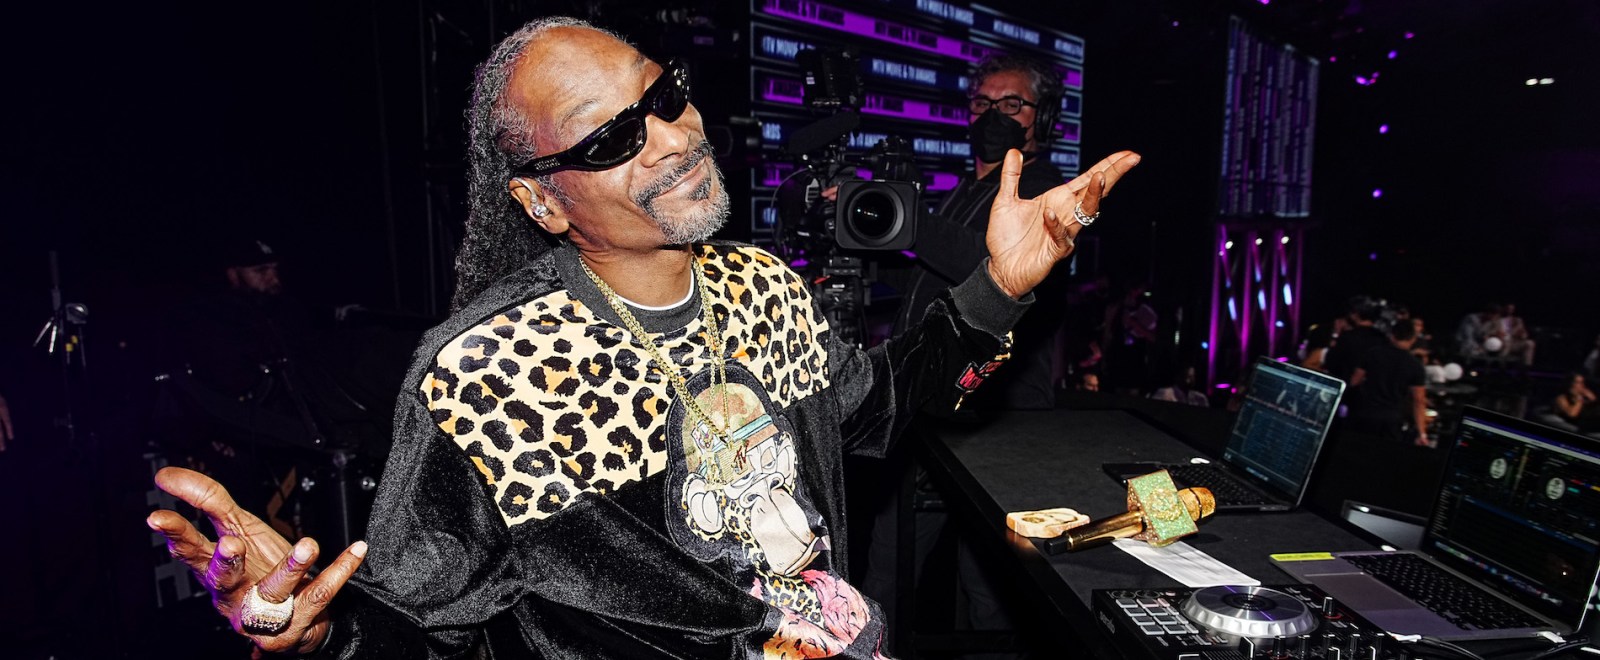 Snoop Dogg Reacts To A Proposal Happening Right In Front Of Him In A